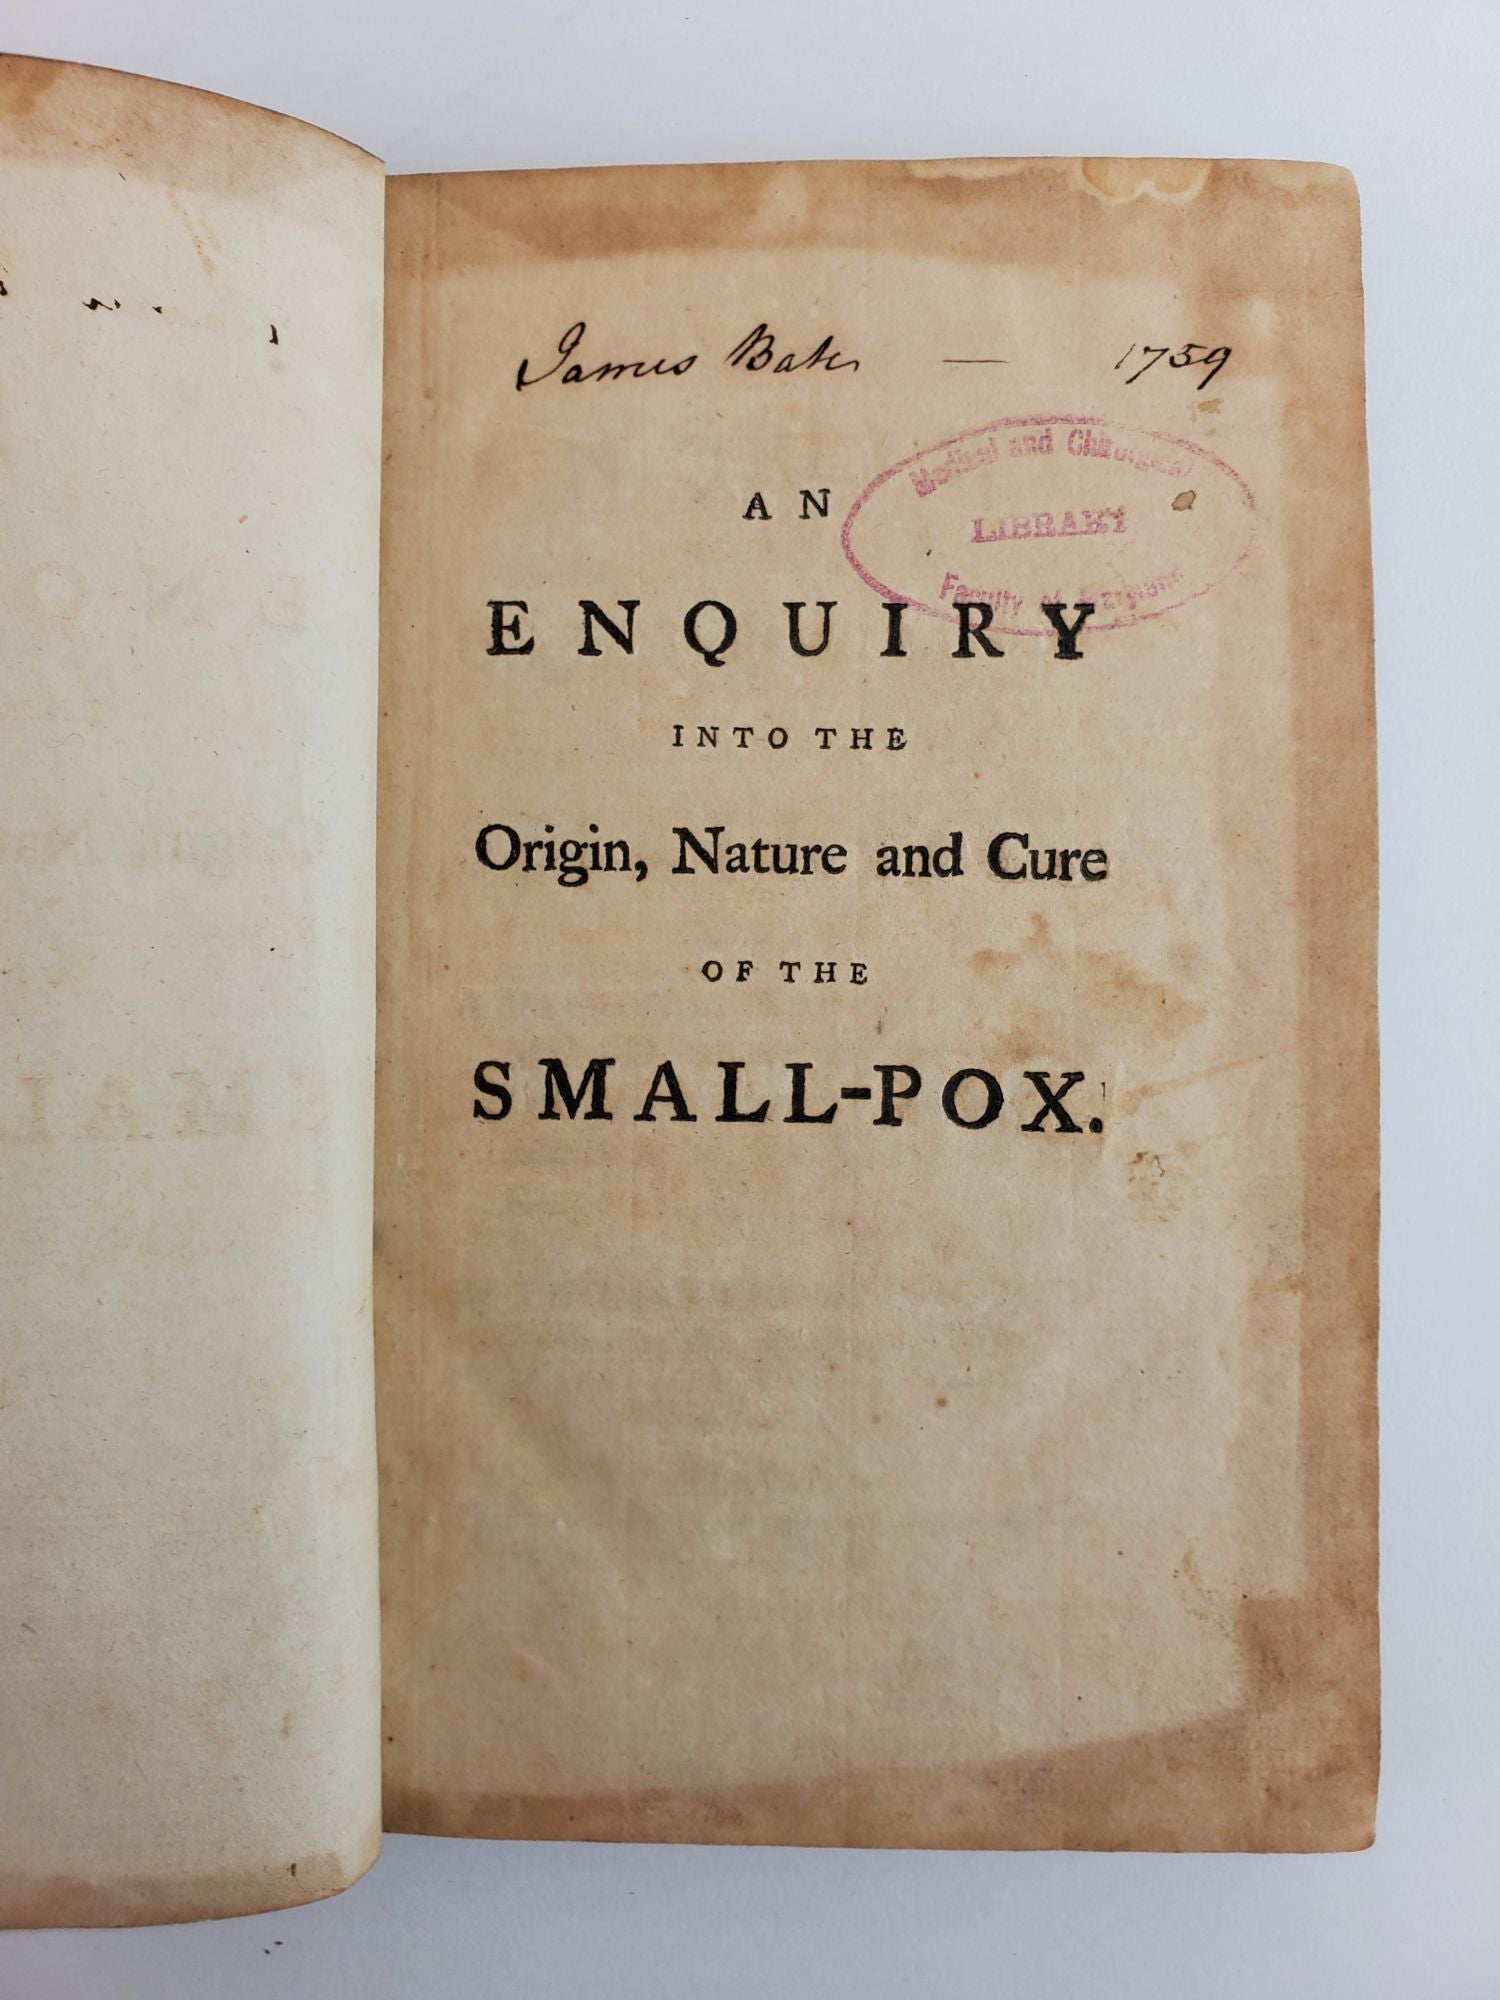 Product Image for AN ENQUIRY INTO THE ORIGIN, NATURE AND CURE OF THE SMALL-POX. TO WHICH IS ADDED, A PREFATORY ADDRESS TO DR. MEAD, CONCERNING THE PRESENT DISCIPLINE IN THE GENERAL ADMINISTRATION OF PHYSIC IN THIS KINGDOM